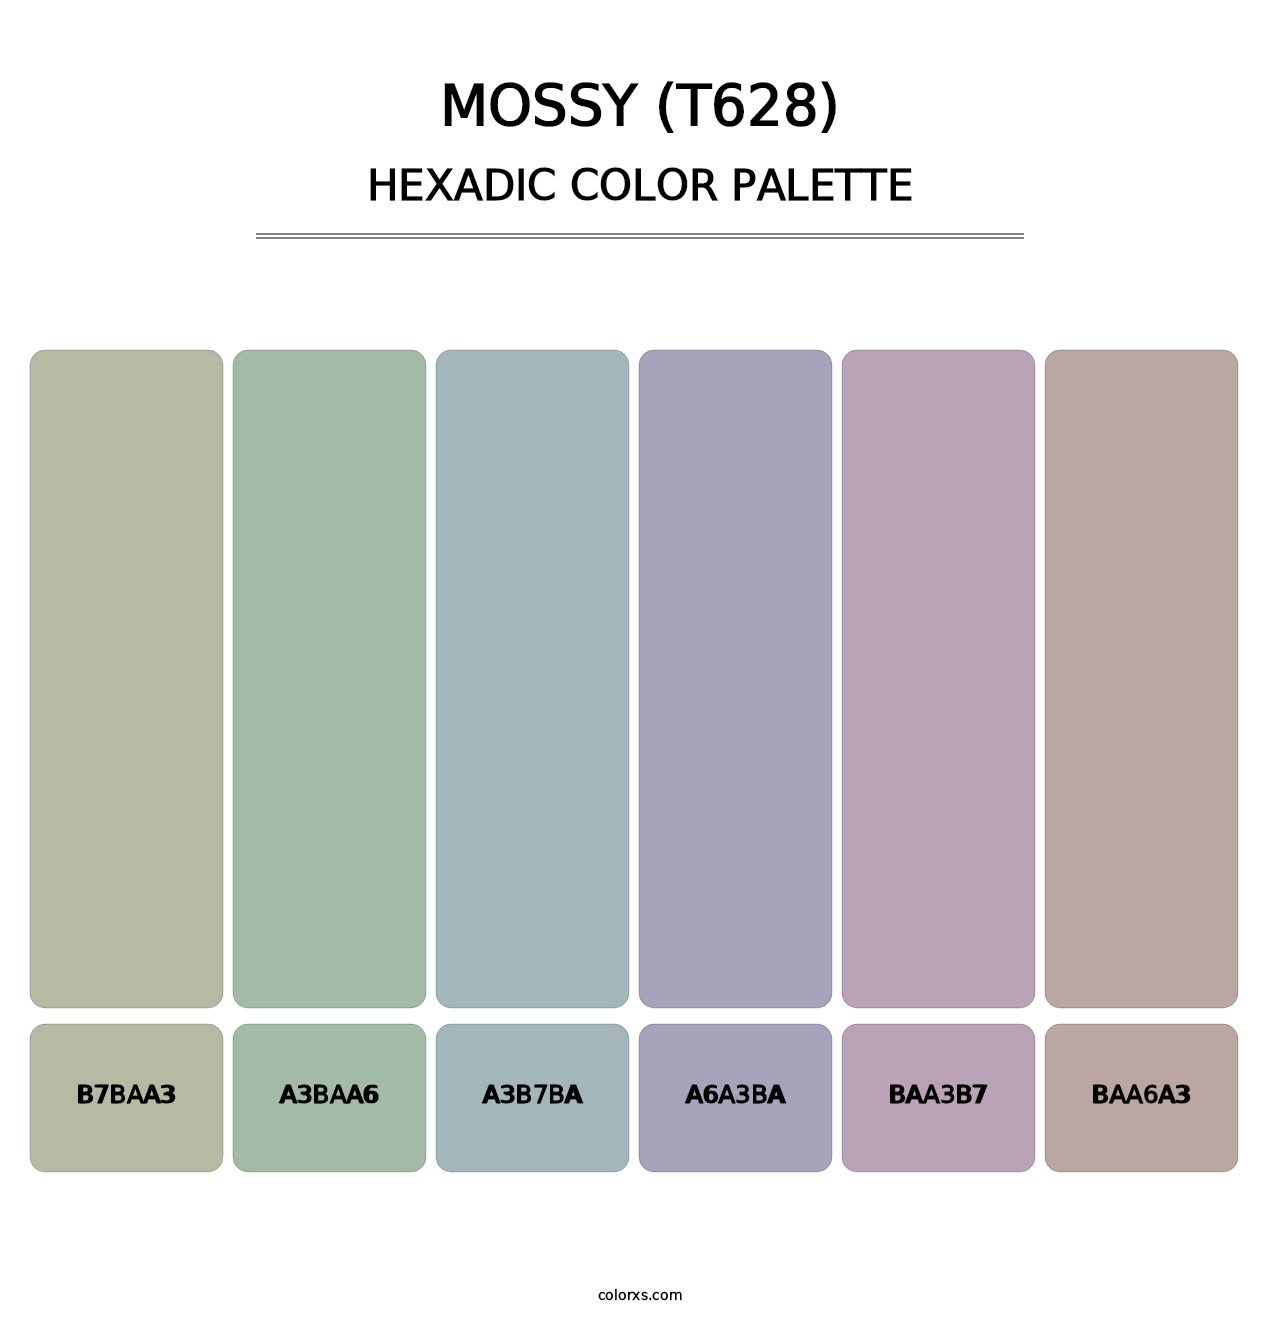 Mossy (T628) - Hexadic Color Palette